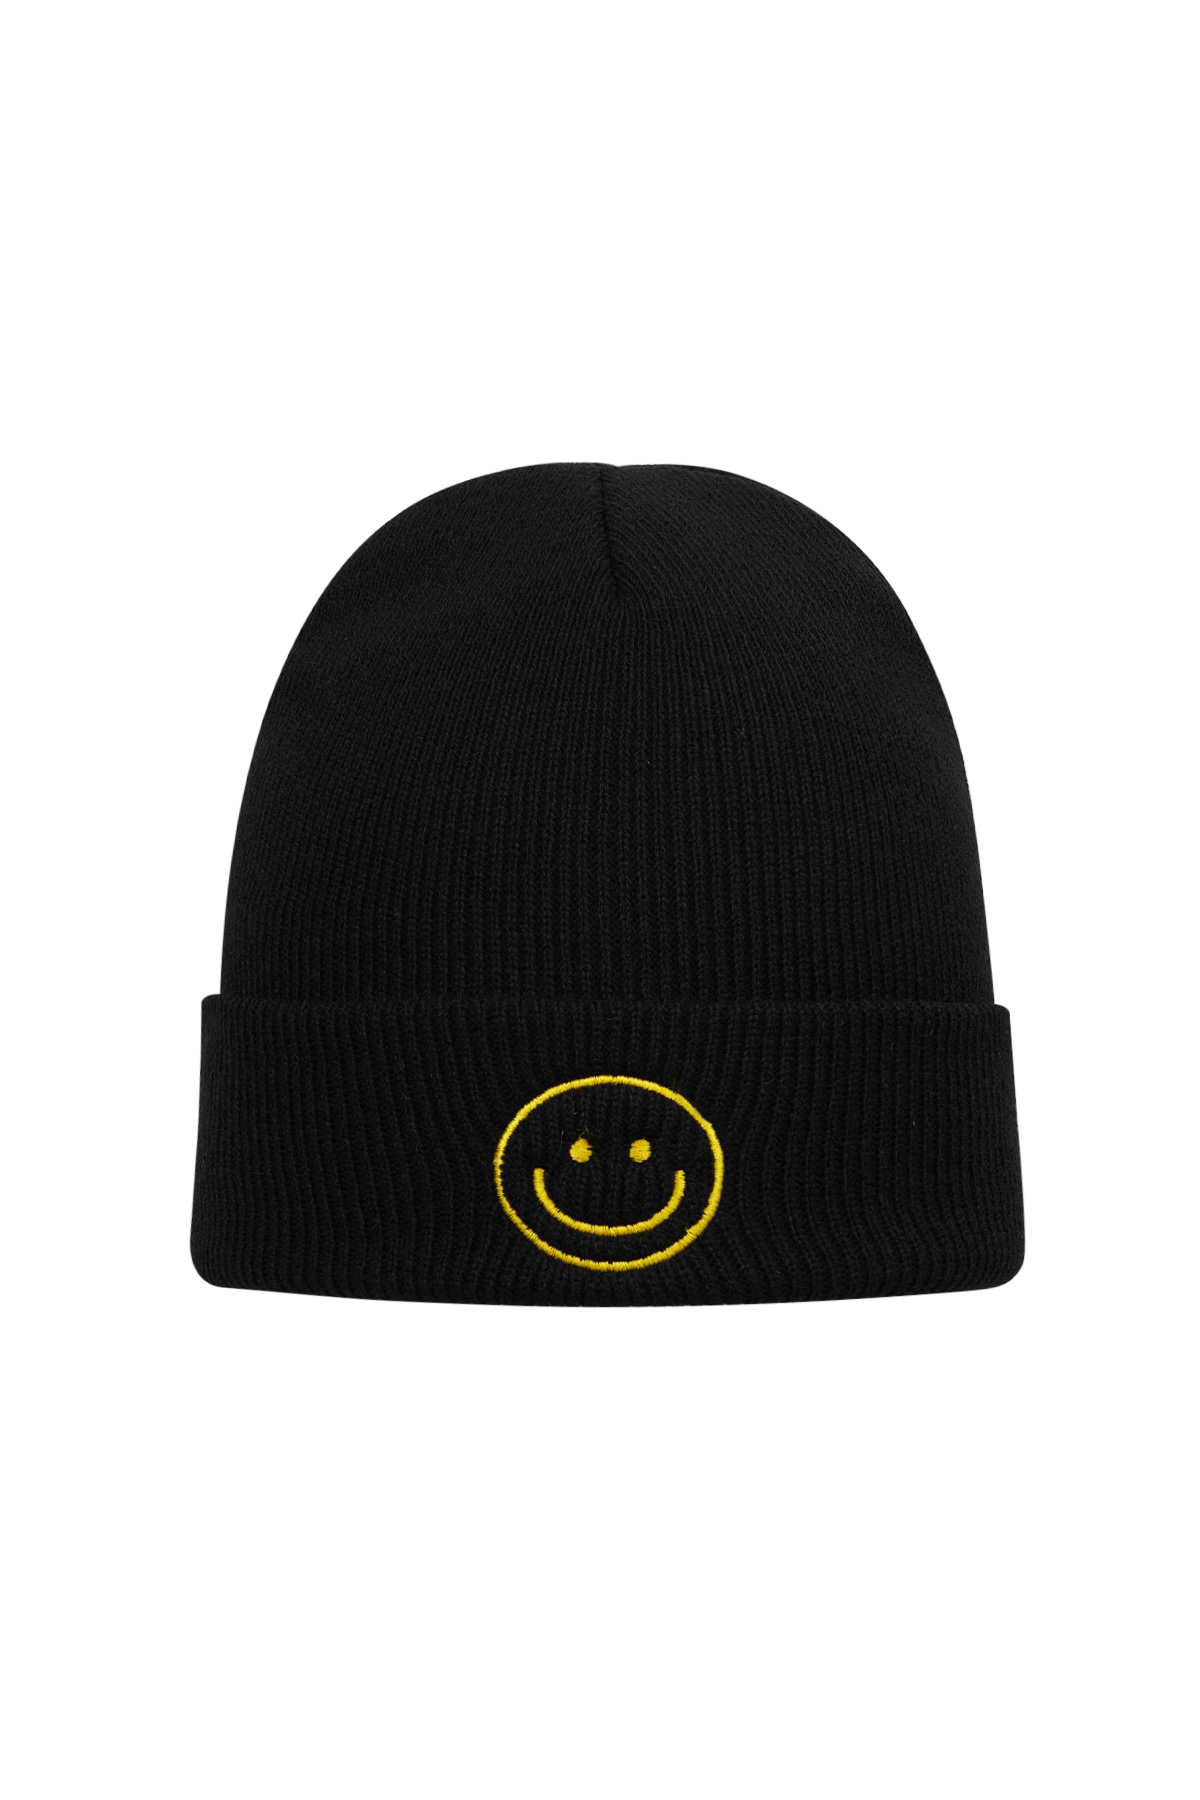 Colorful beanie with smiley - black